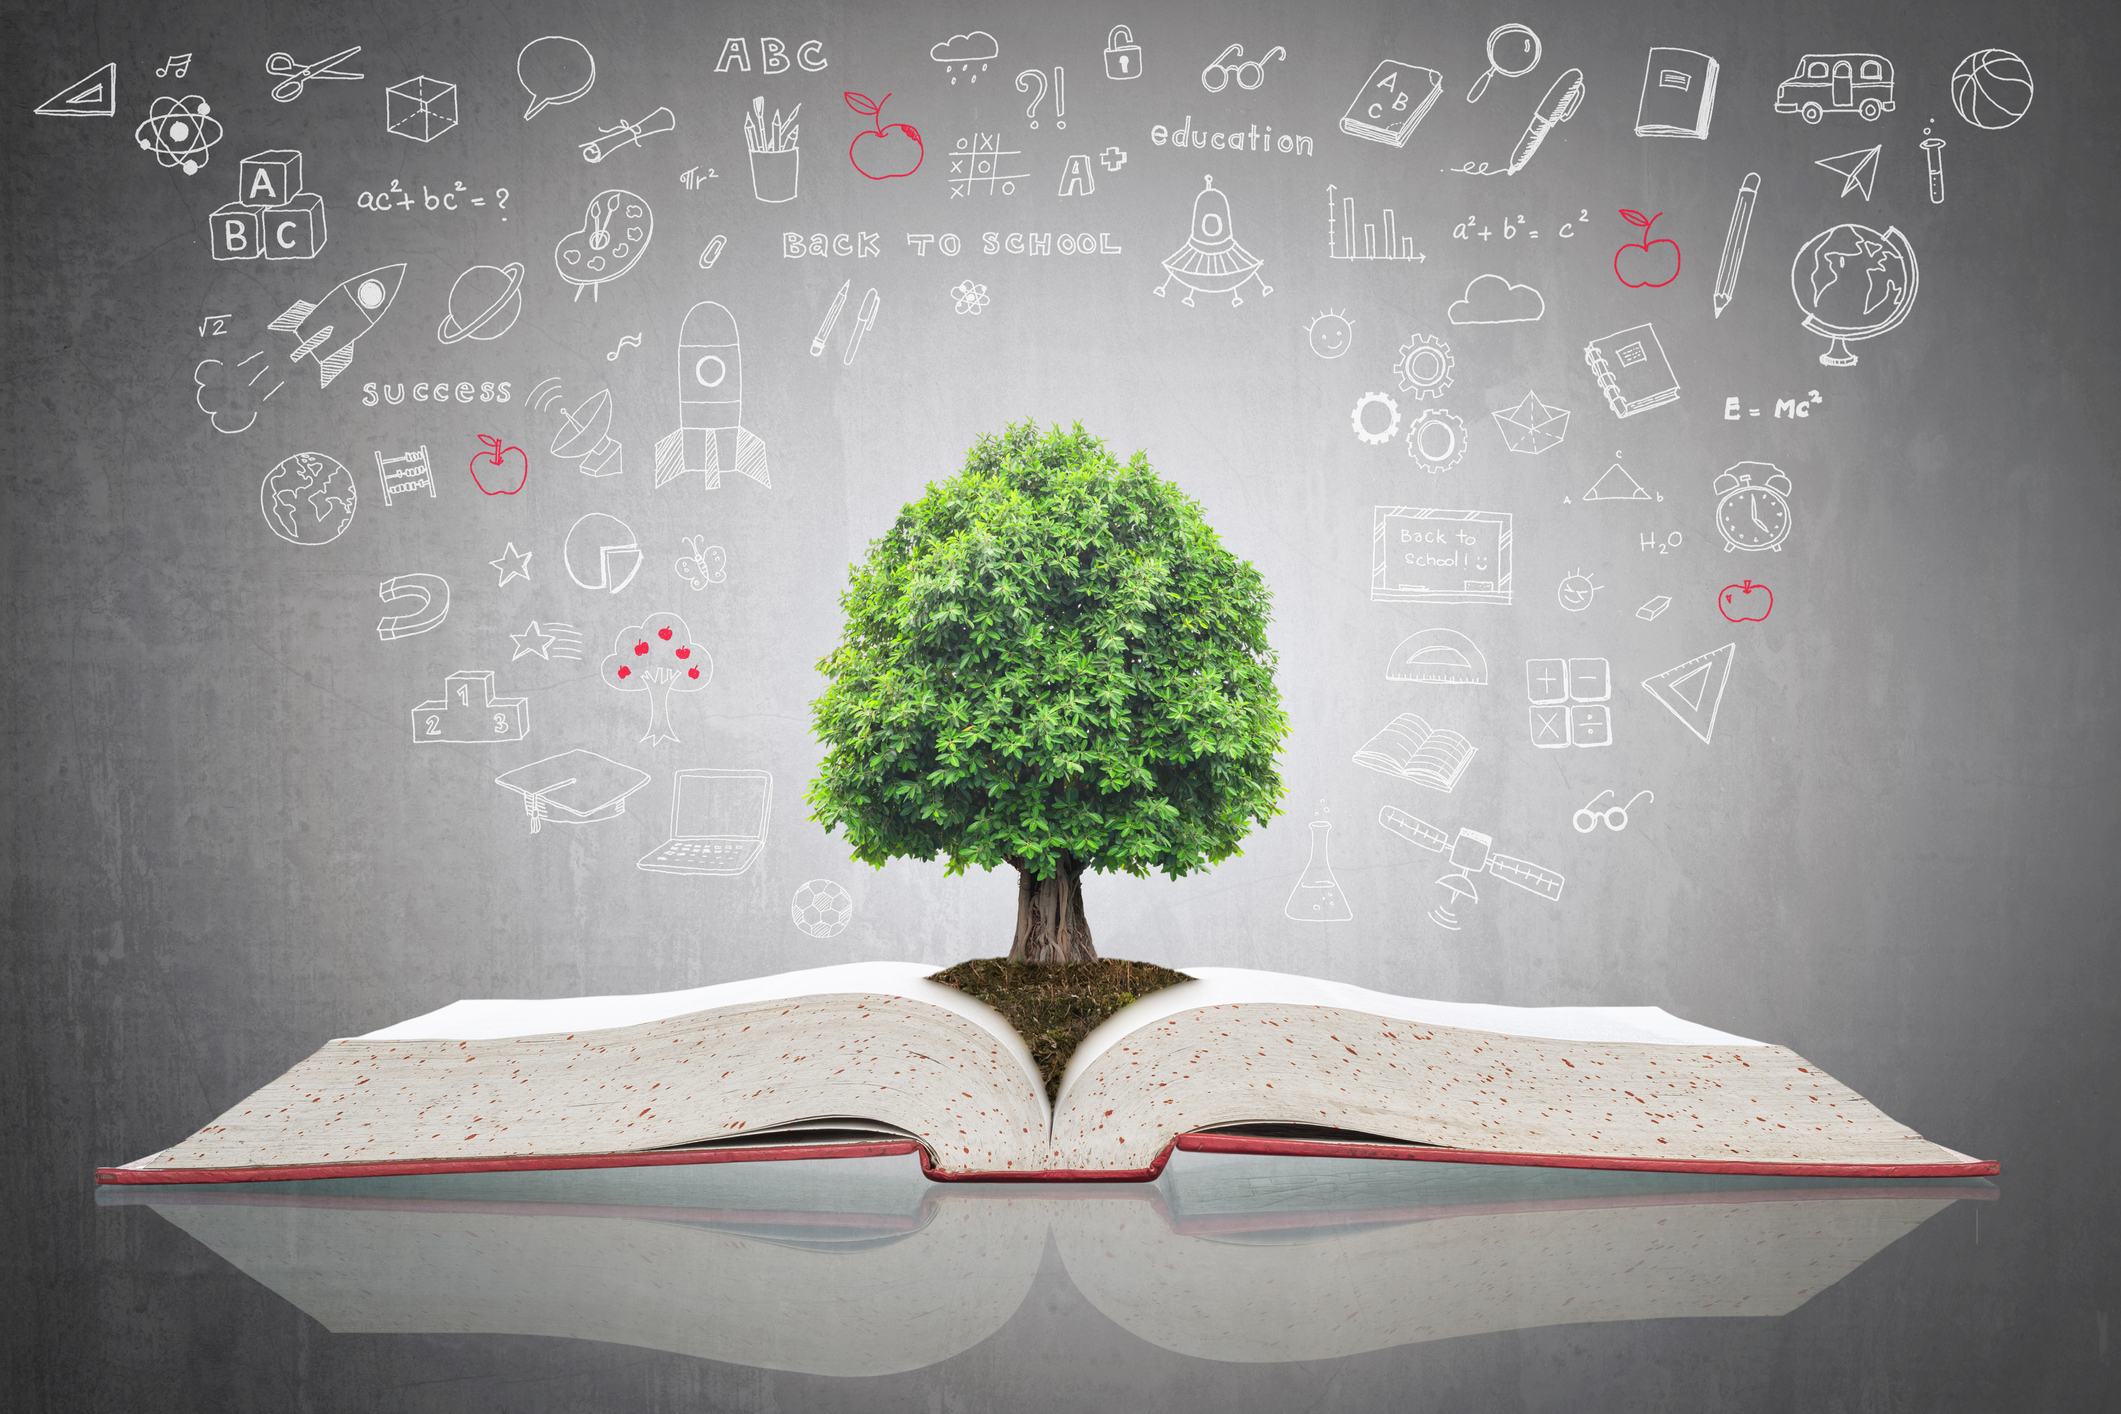 Tree growing on open textbook with doodle for educational investment and success concept. Image credit: iStock